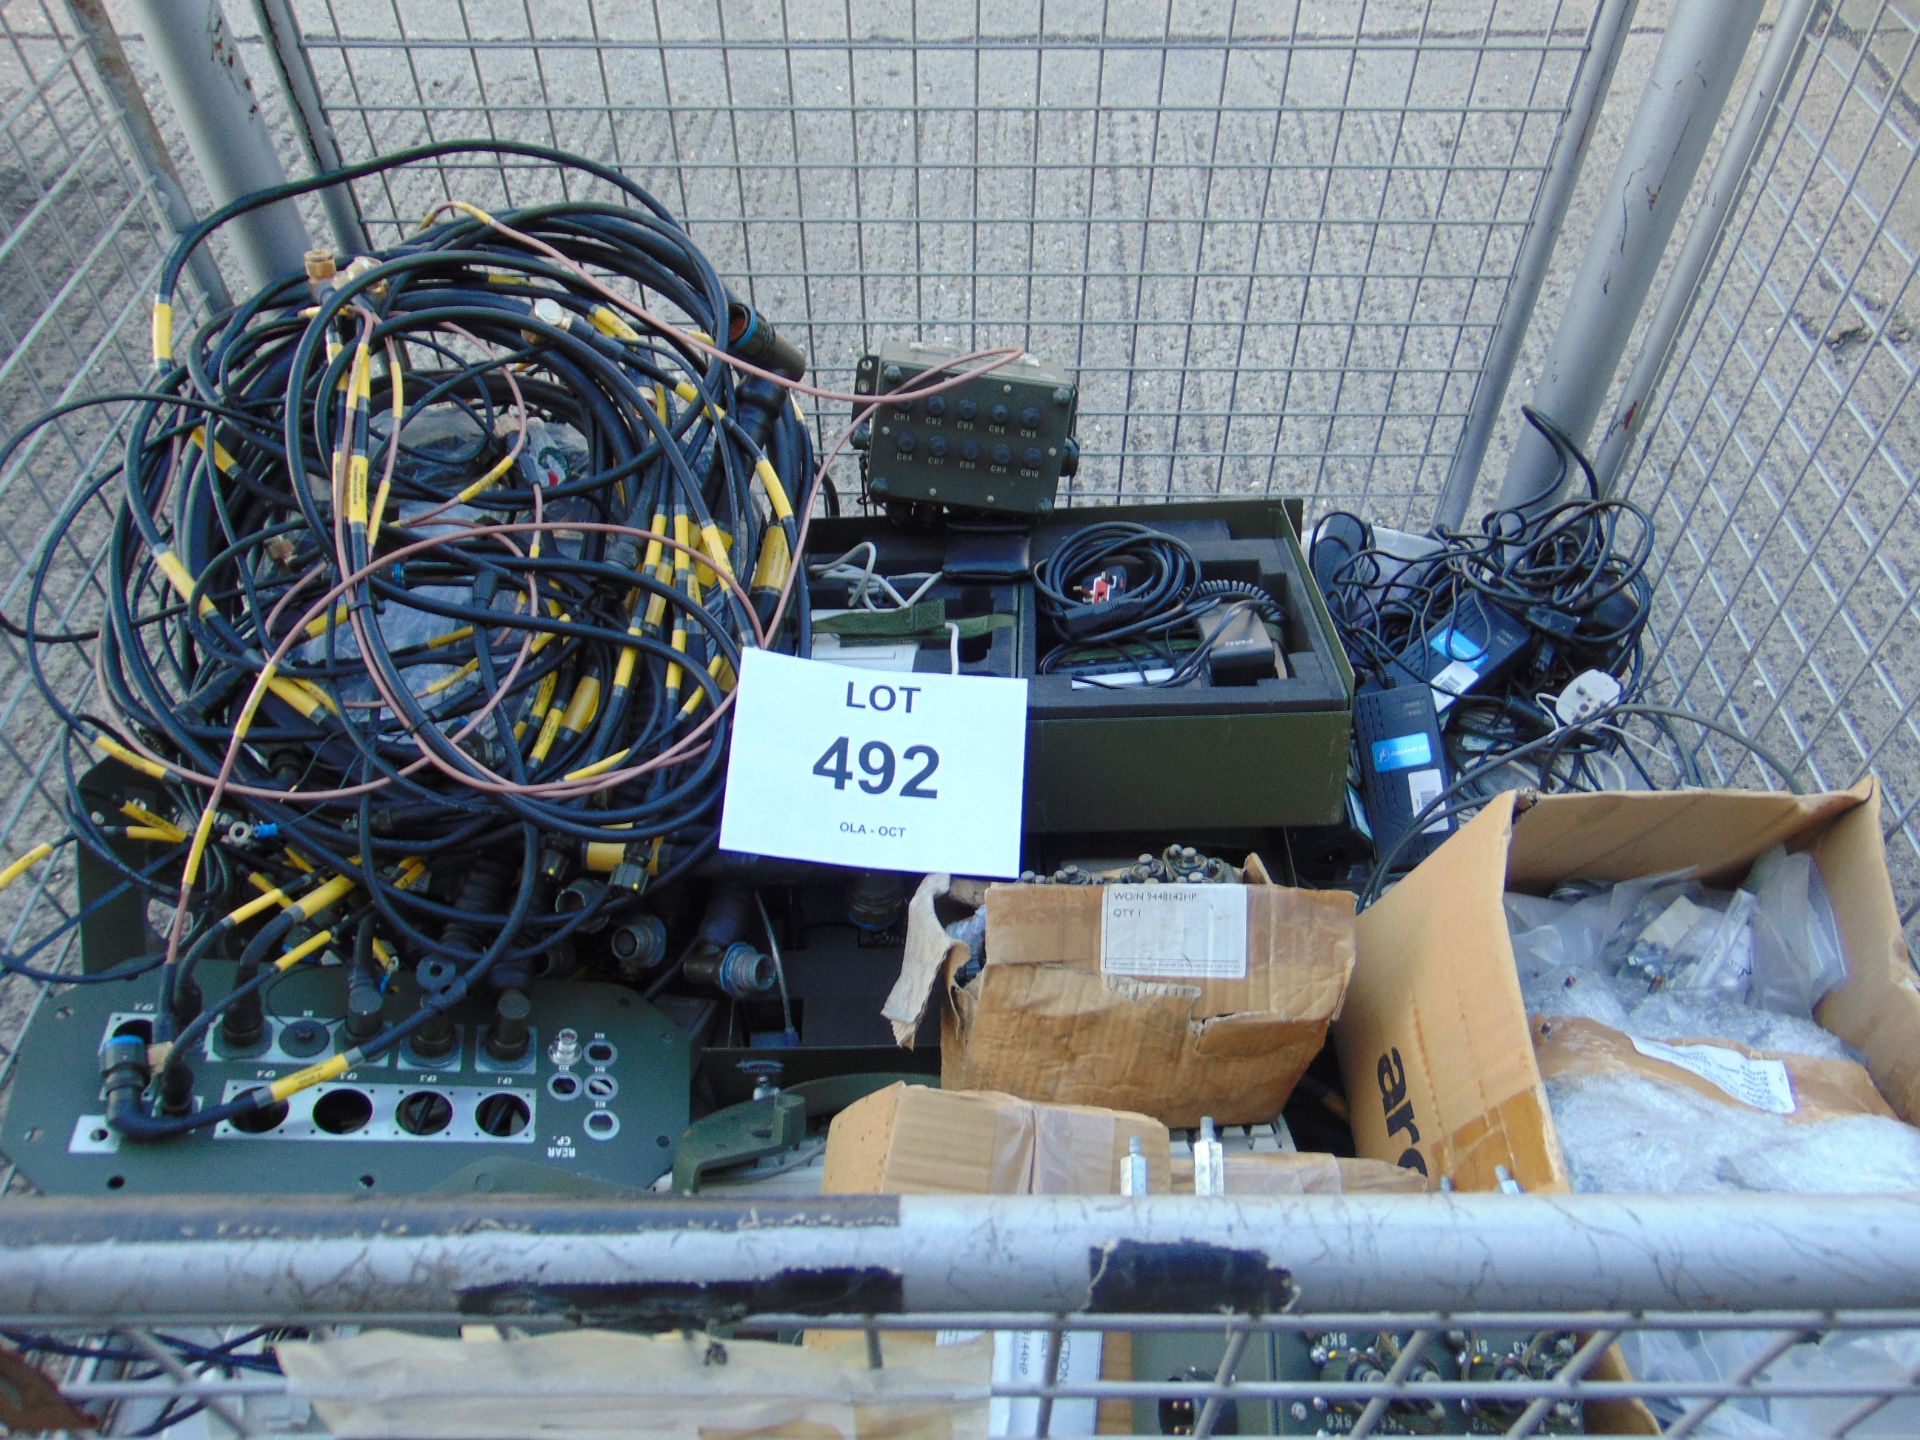 1 x Stillage of Comms Equipment and Spares, Cables etc - Image 4 of 7